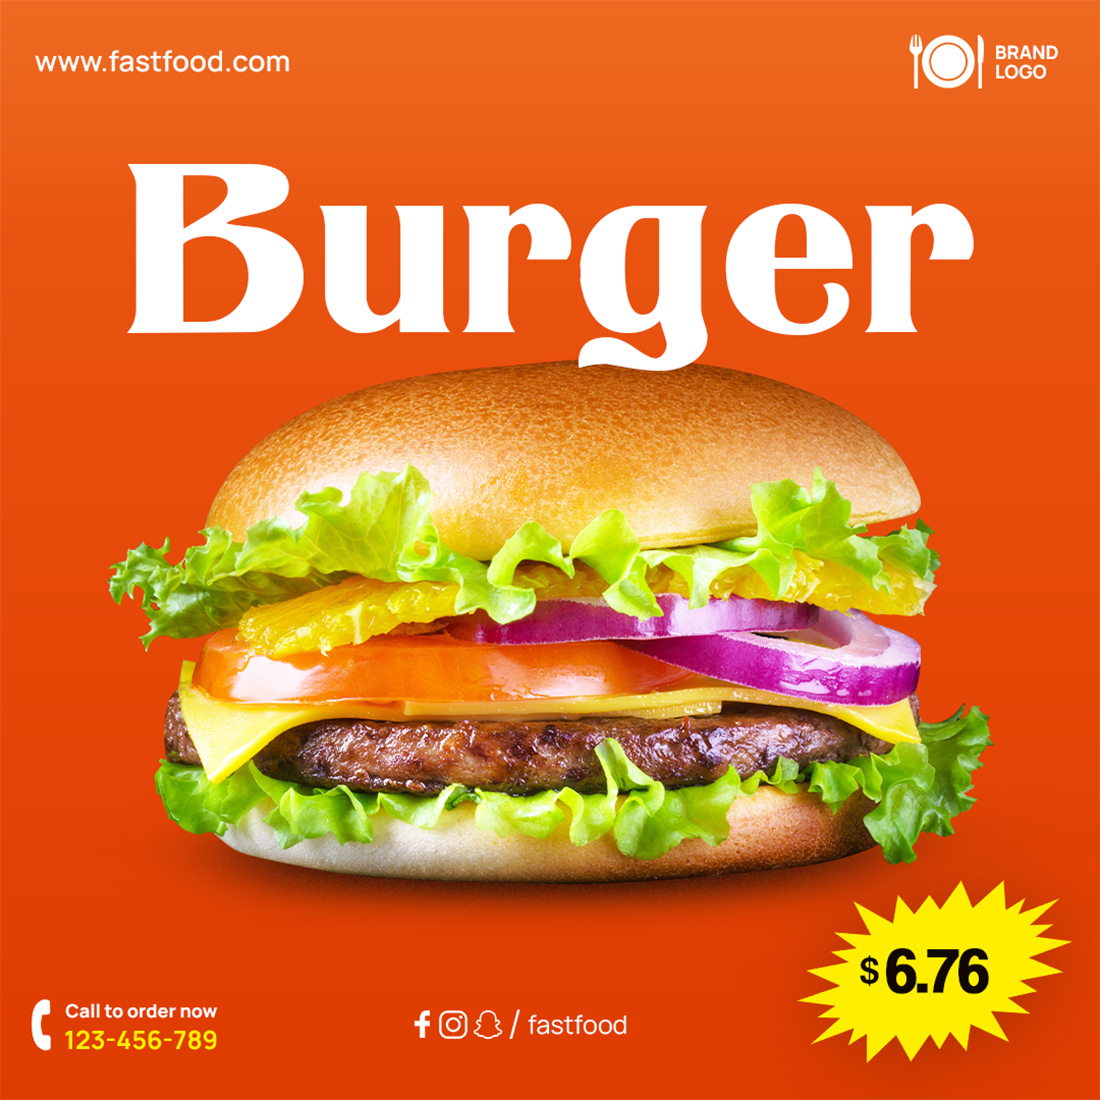 Delicious Burger High-Resolution Social Media Banner Template cover image.